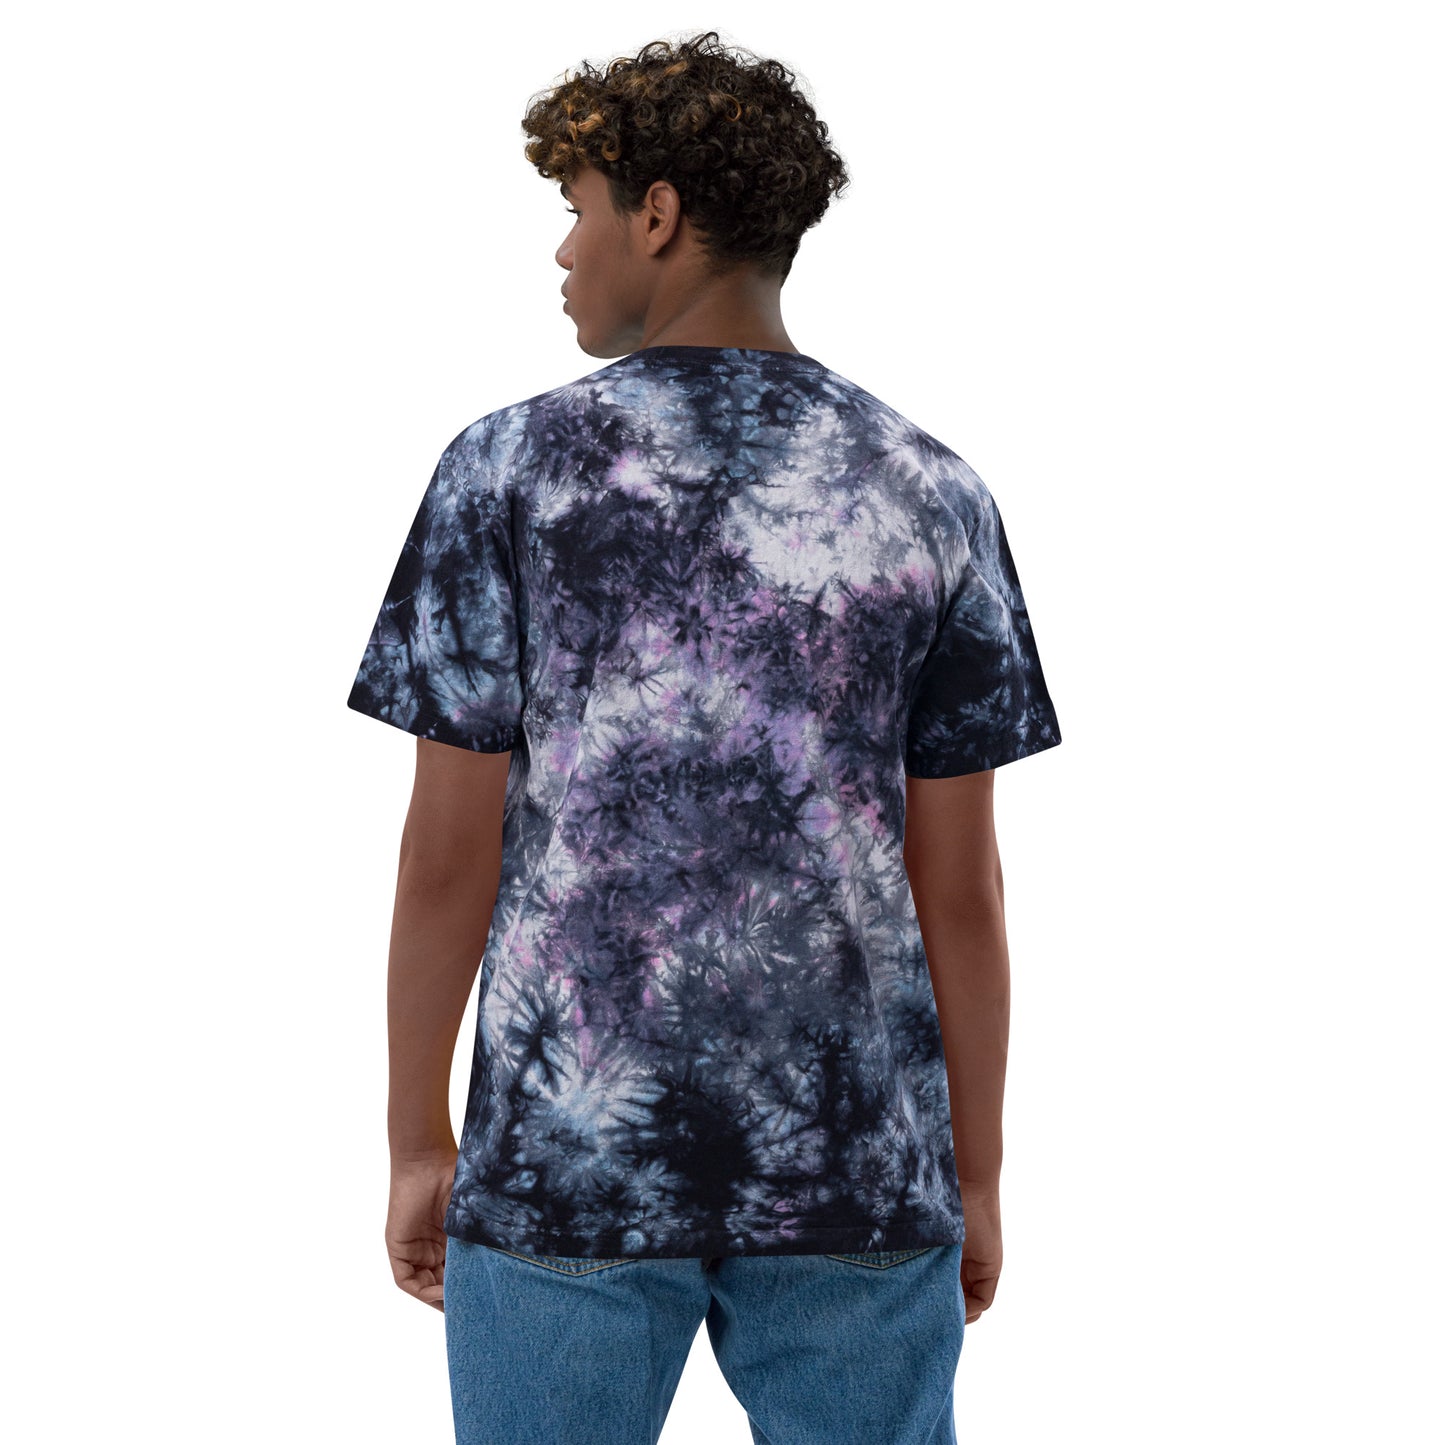 Stand With Israel T-shirt tie-dye unisexe surdimensionné